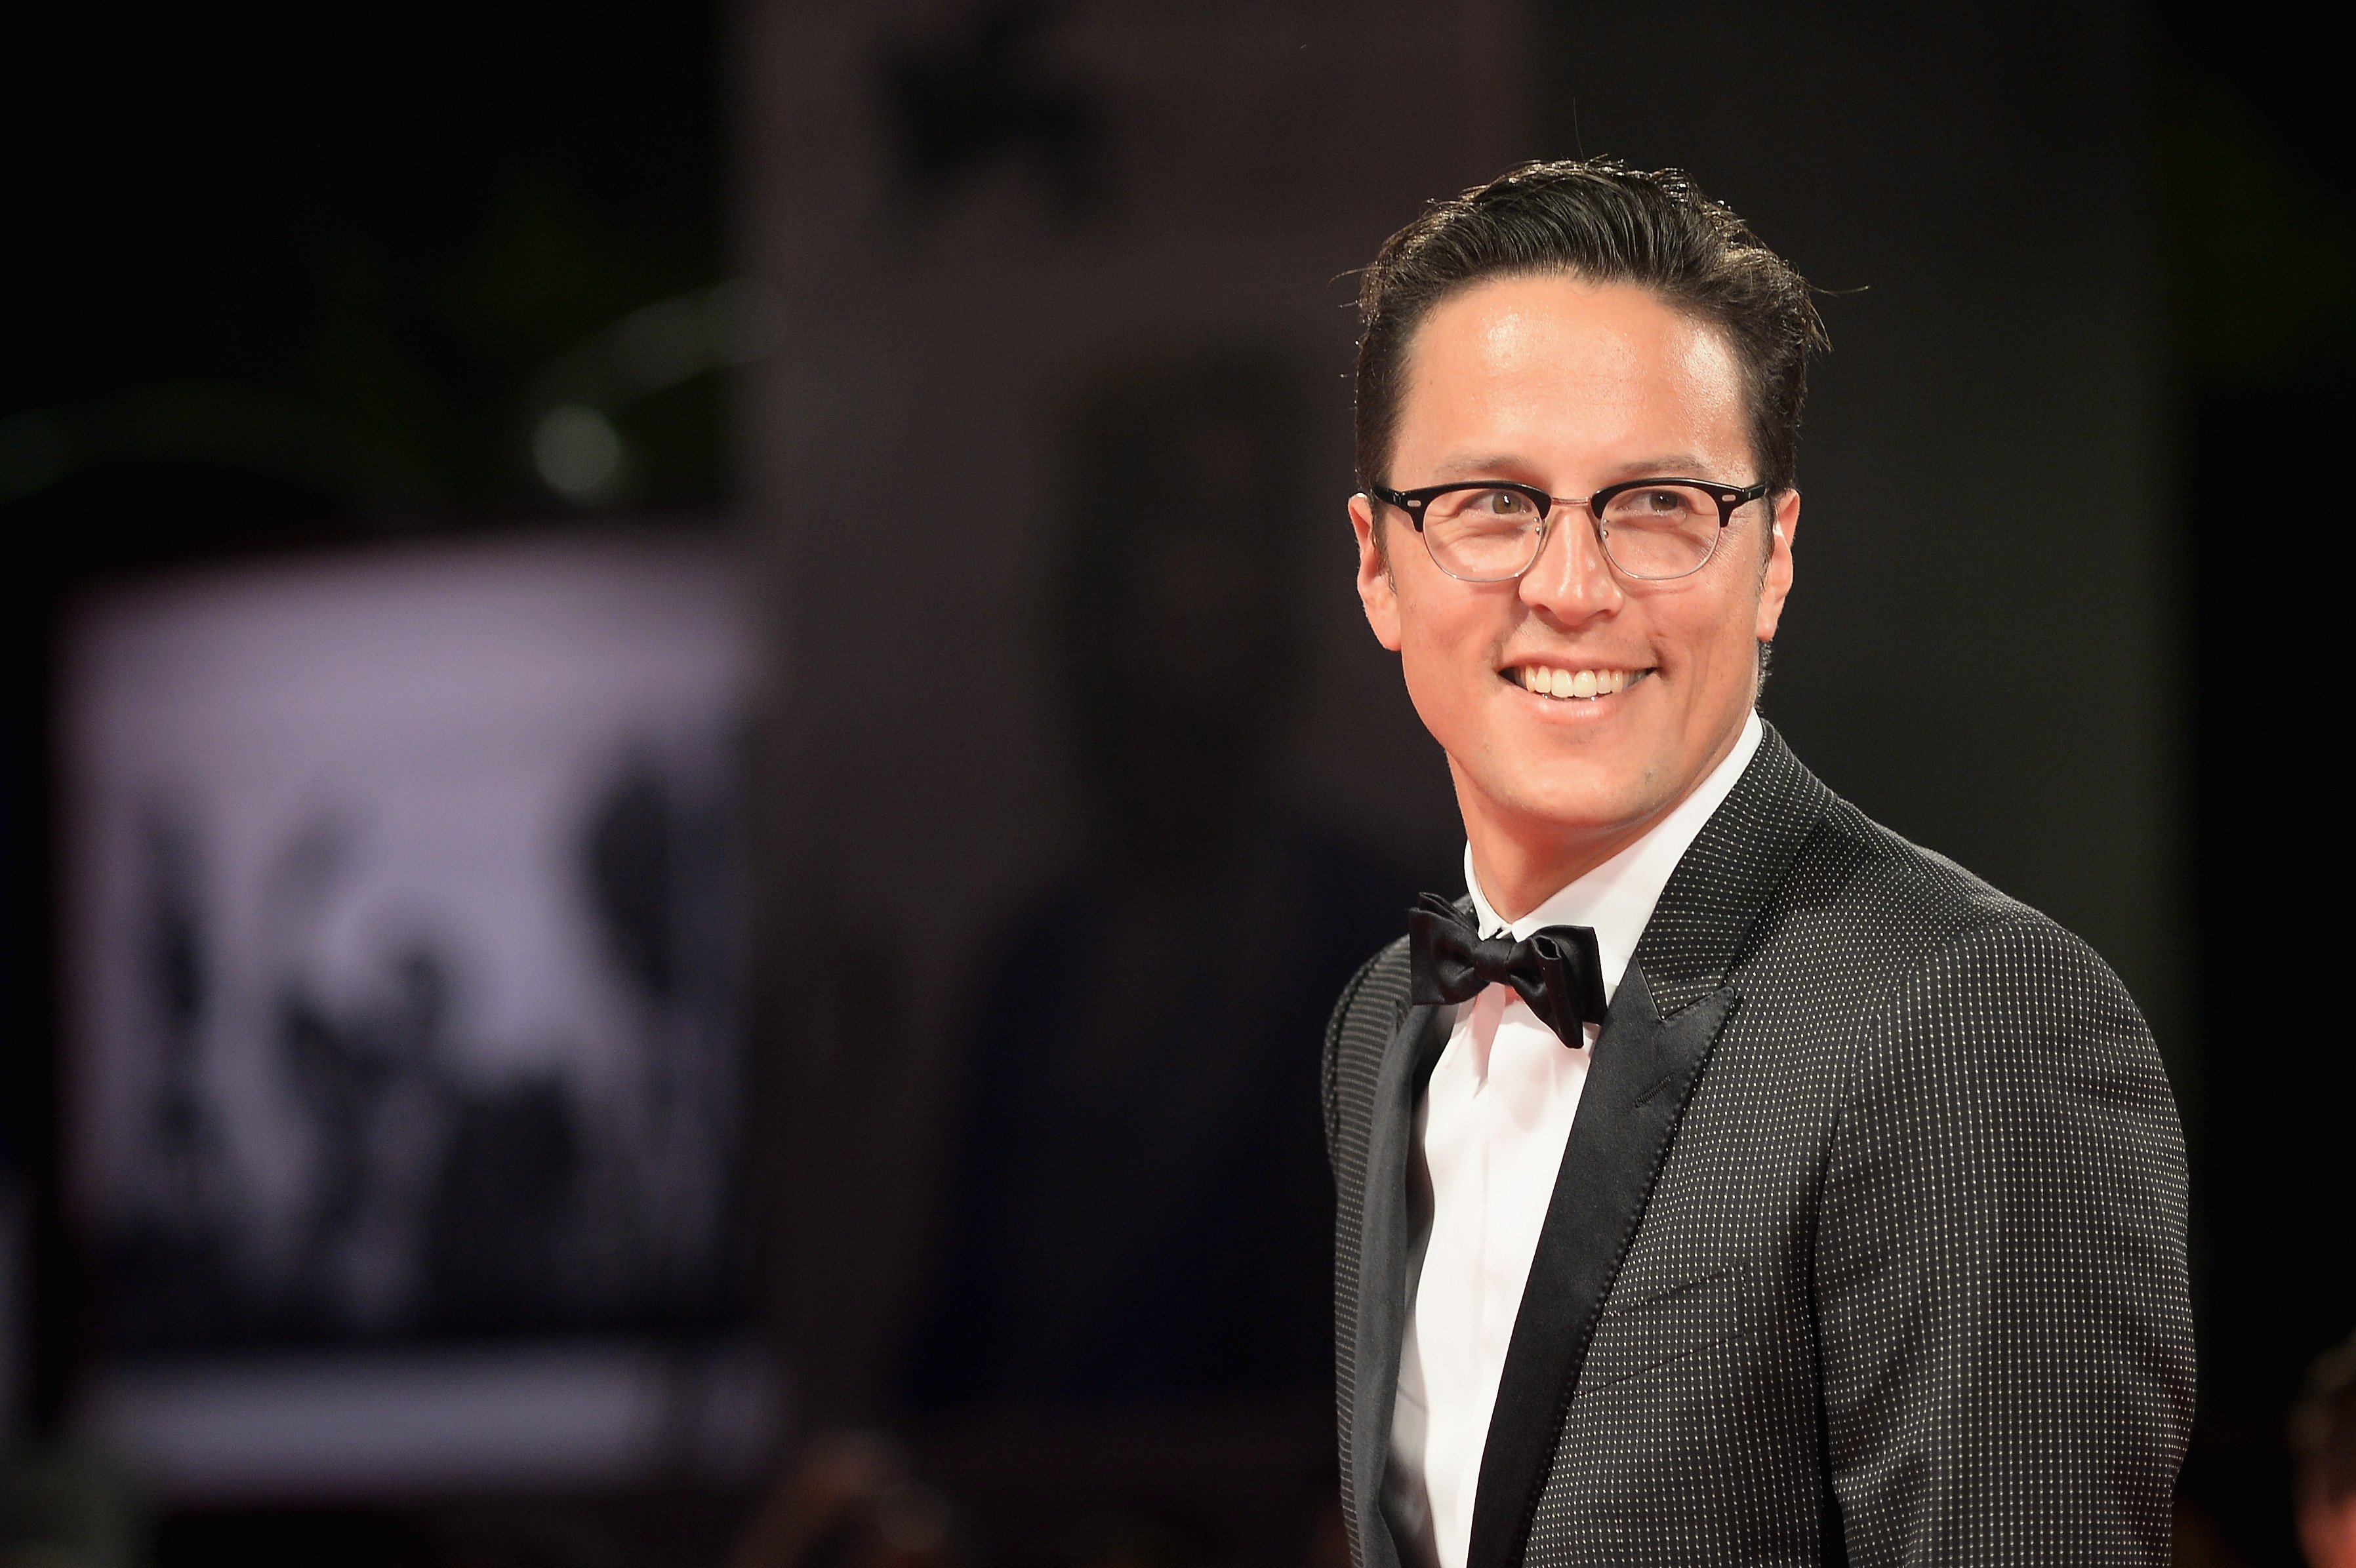 Cary Fukunga director of the new James Bond movie No Time to Die flashes a smile